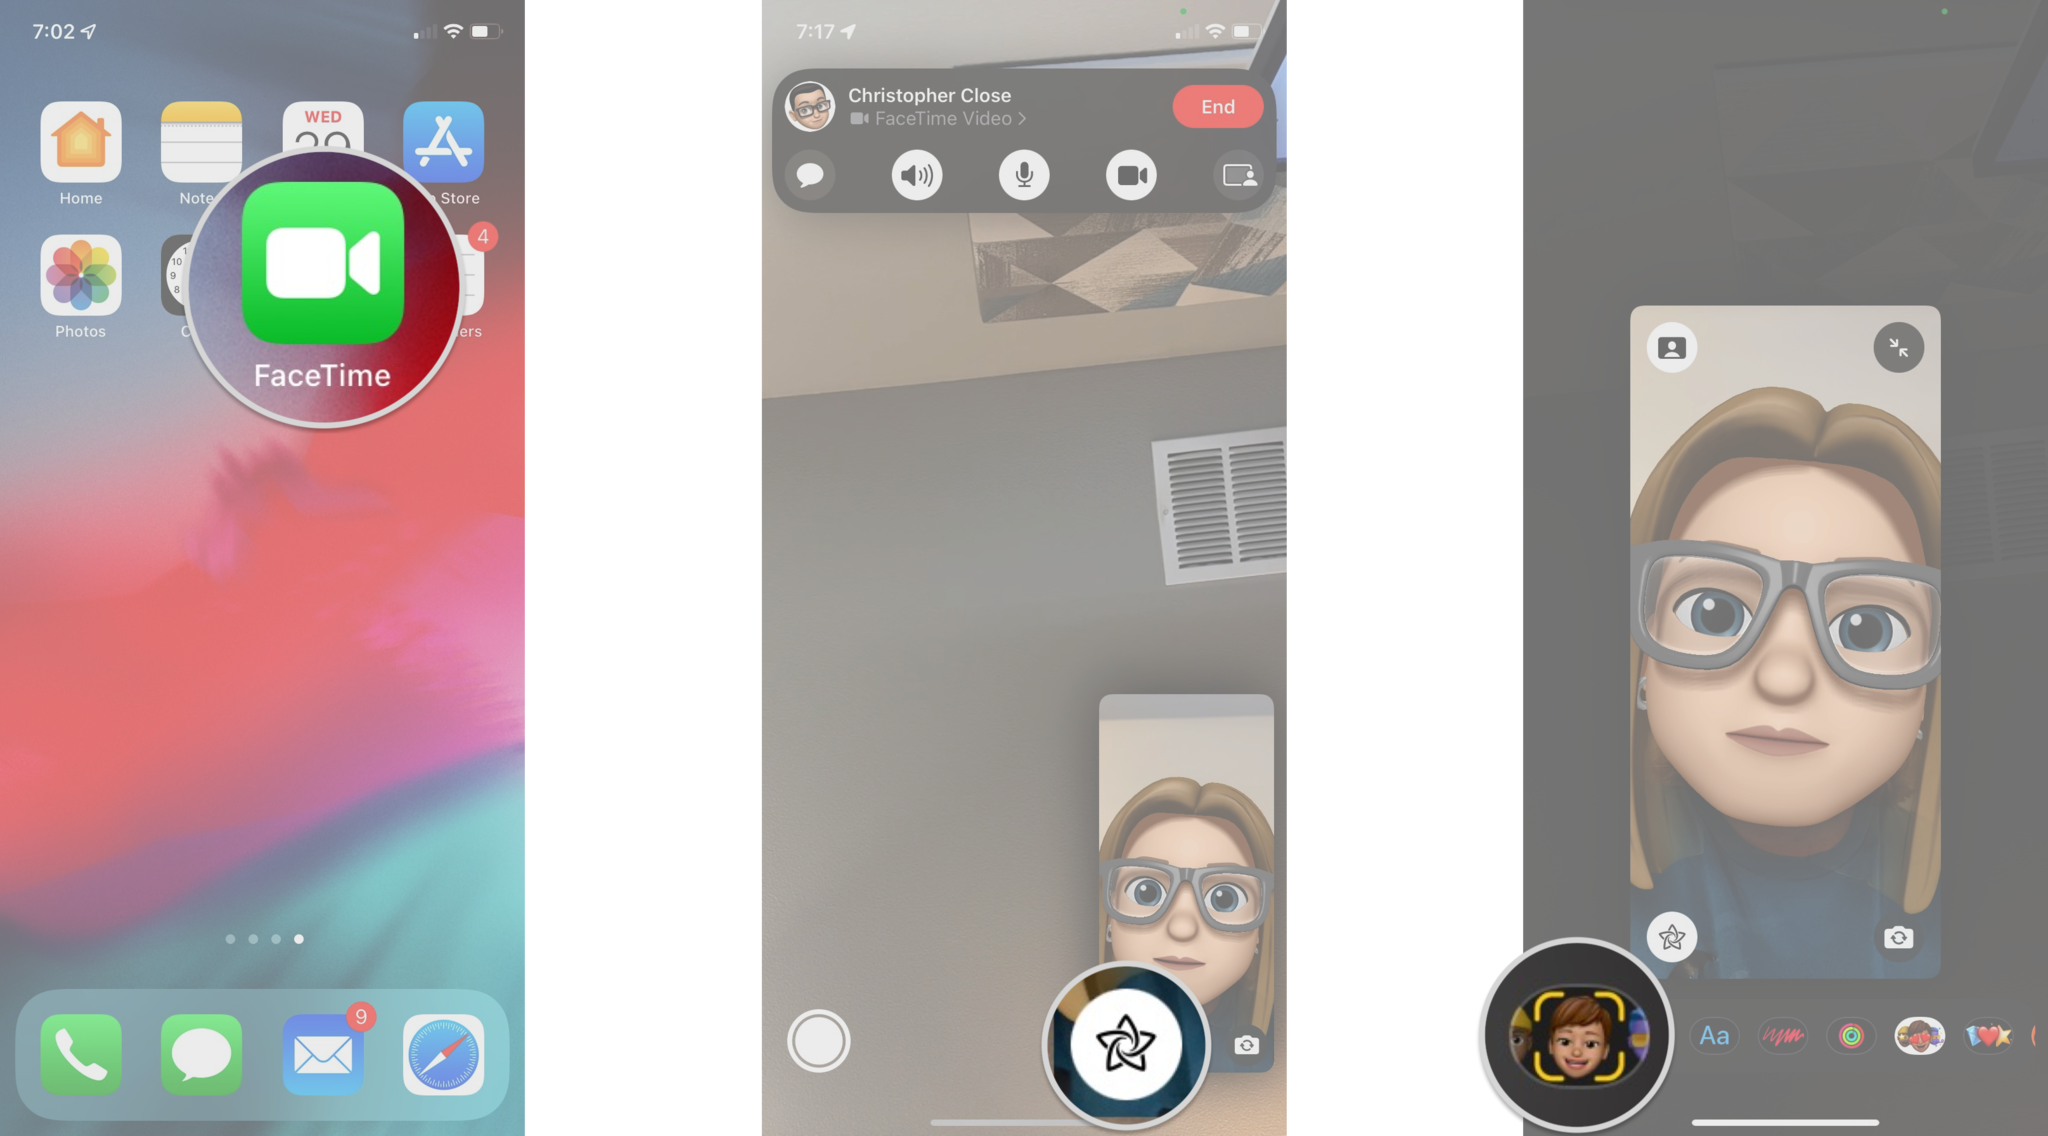 How to use FaceTime Memoji and Animoji on the iPhone by showing steps: Launch FaceTime, Tap the effects button, Tap the Memoji button